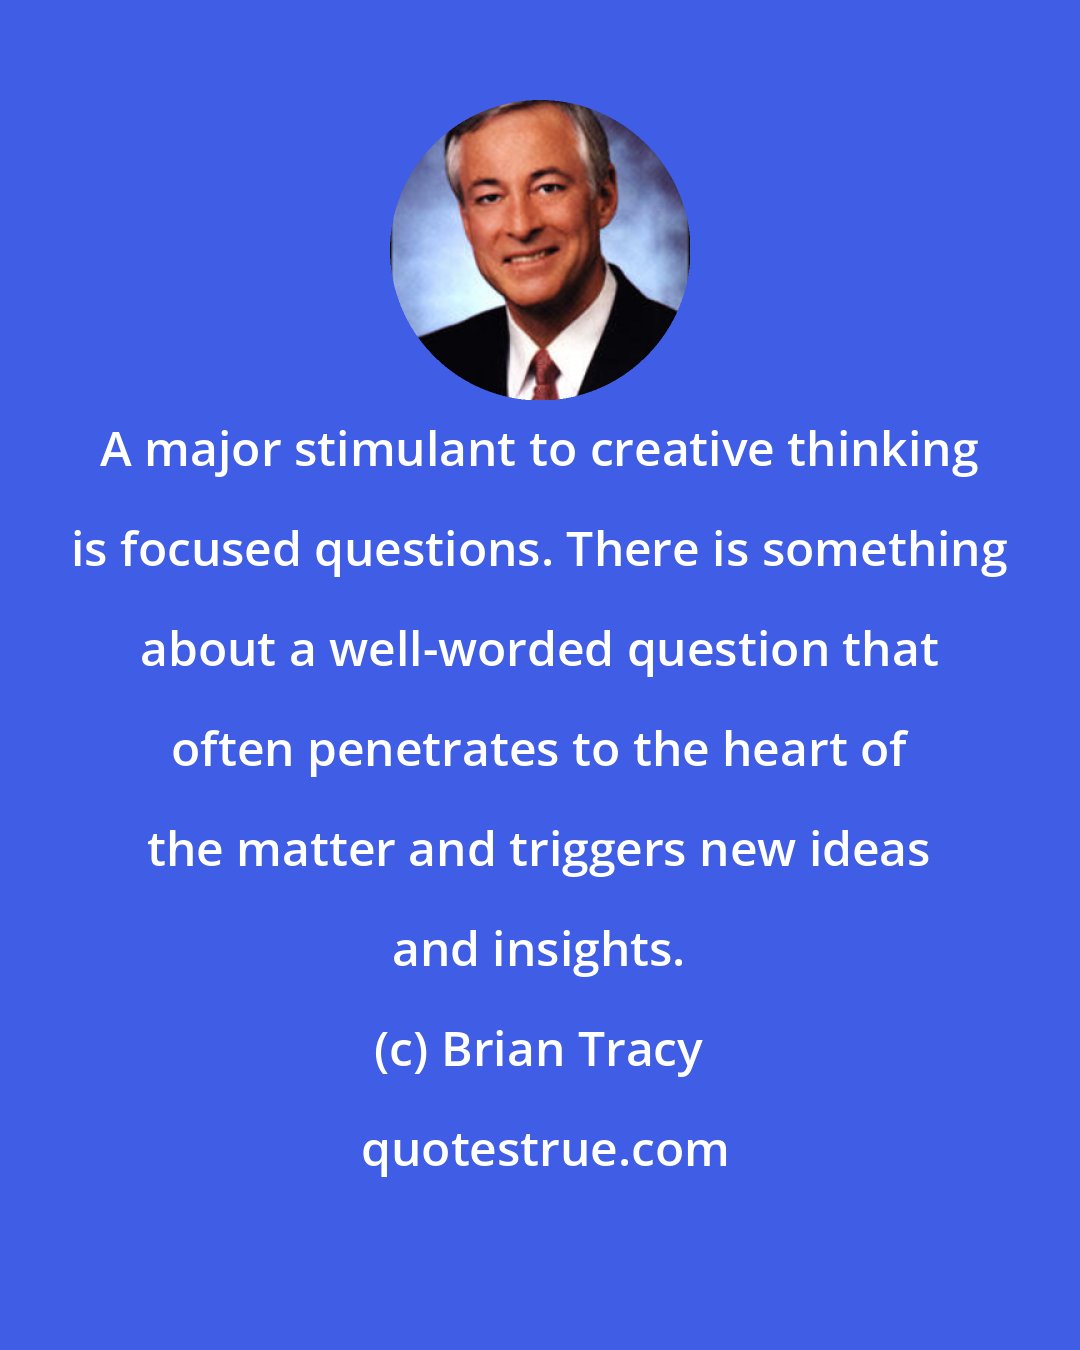 Brian Tracy: A major stimulant to creative thinking is focused questions. There is something about a well-worded question that often penetrates to the heart of the matter and triggers new ideas and insights.